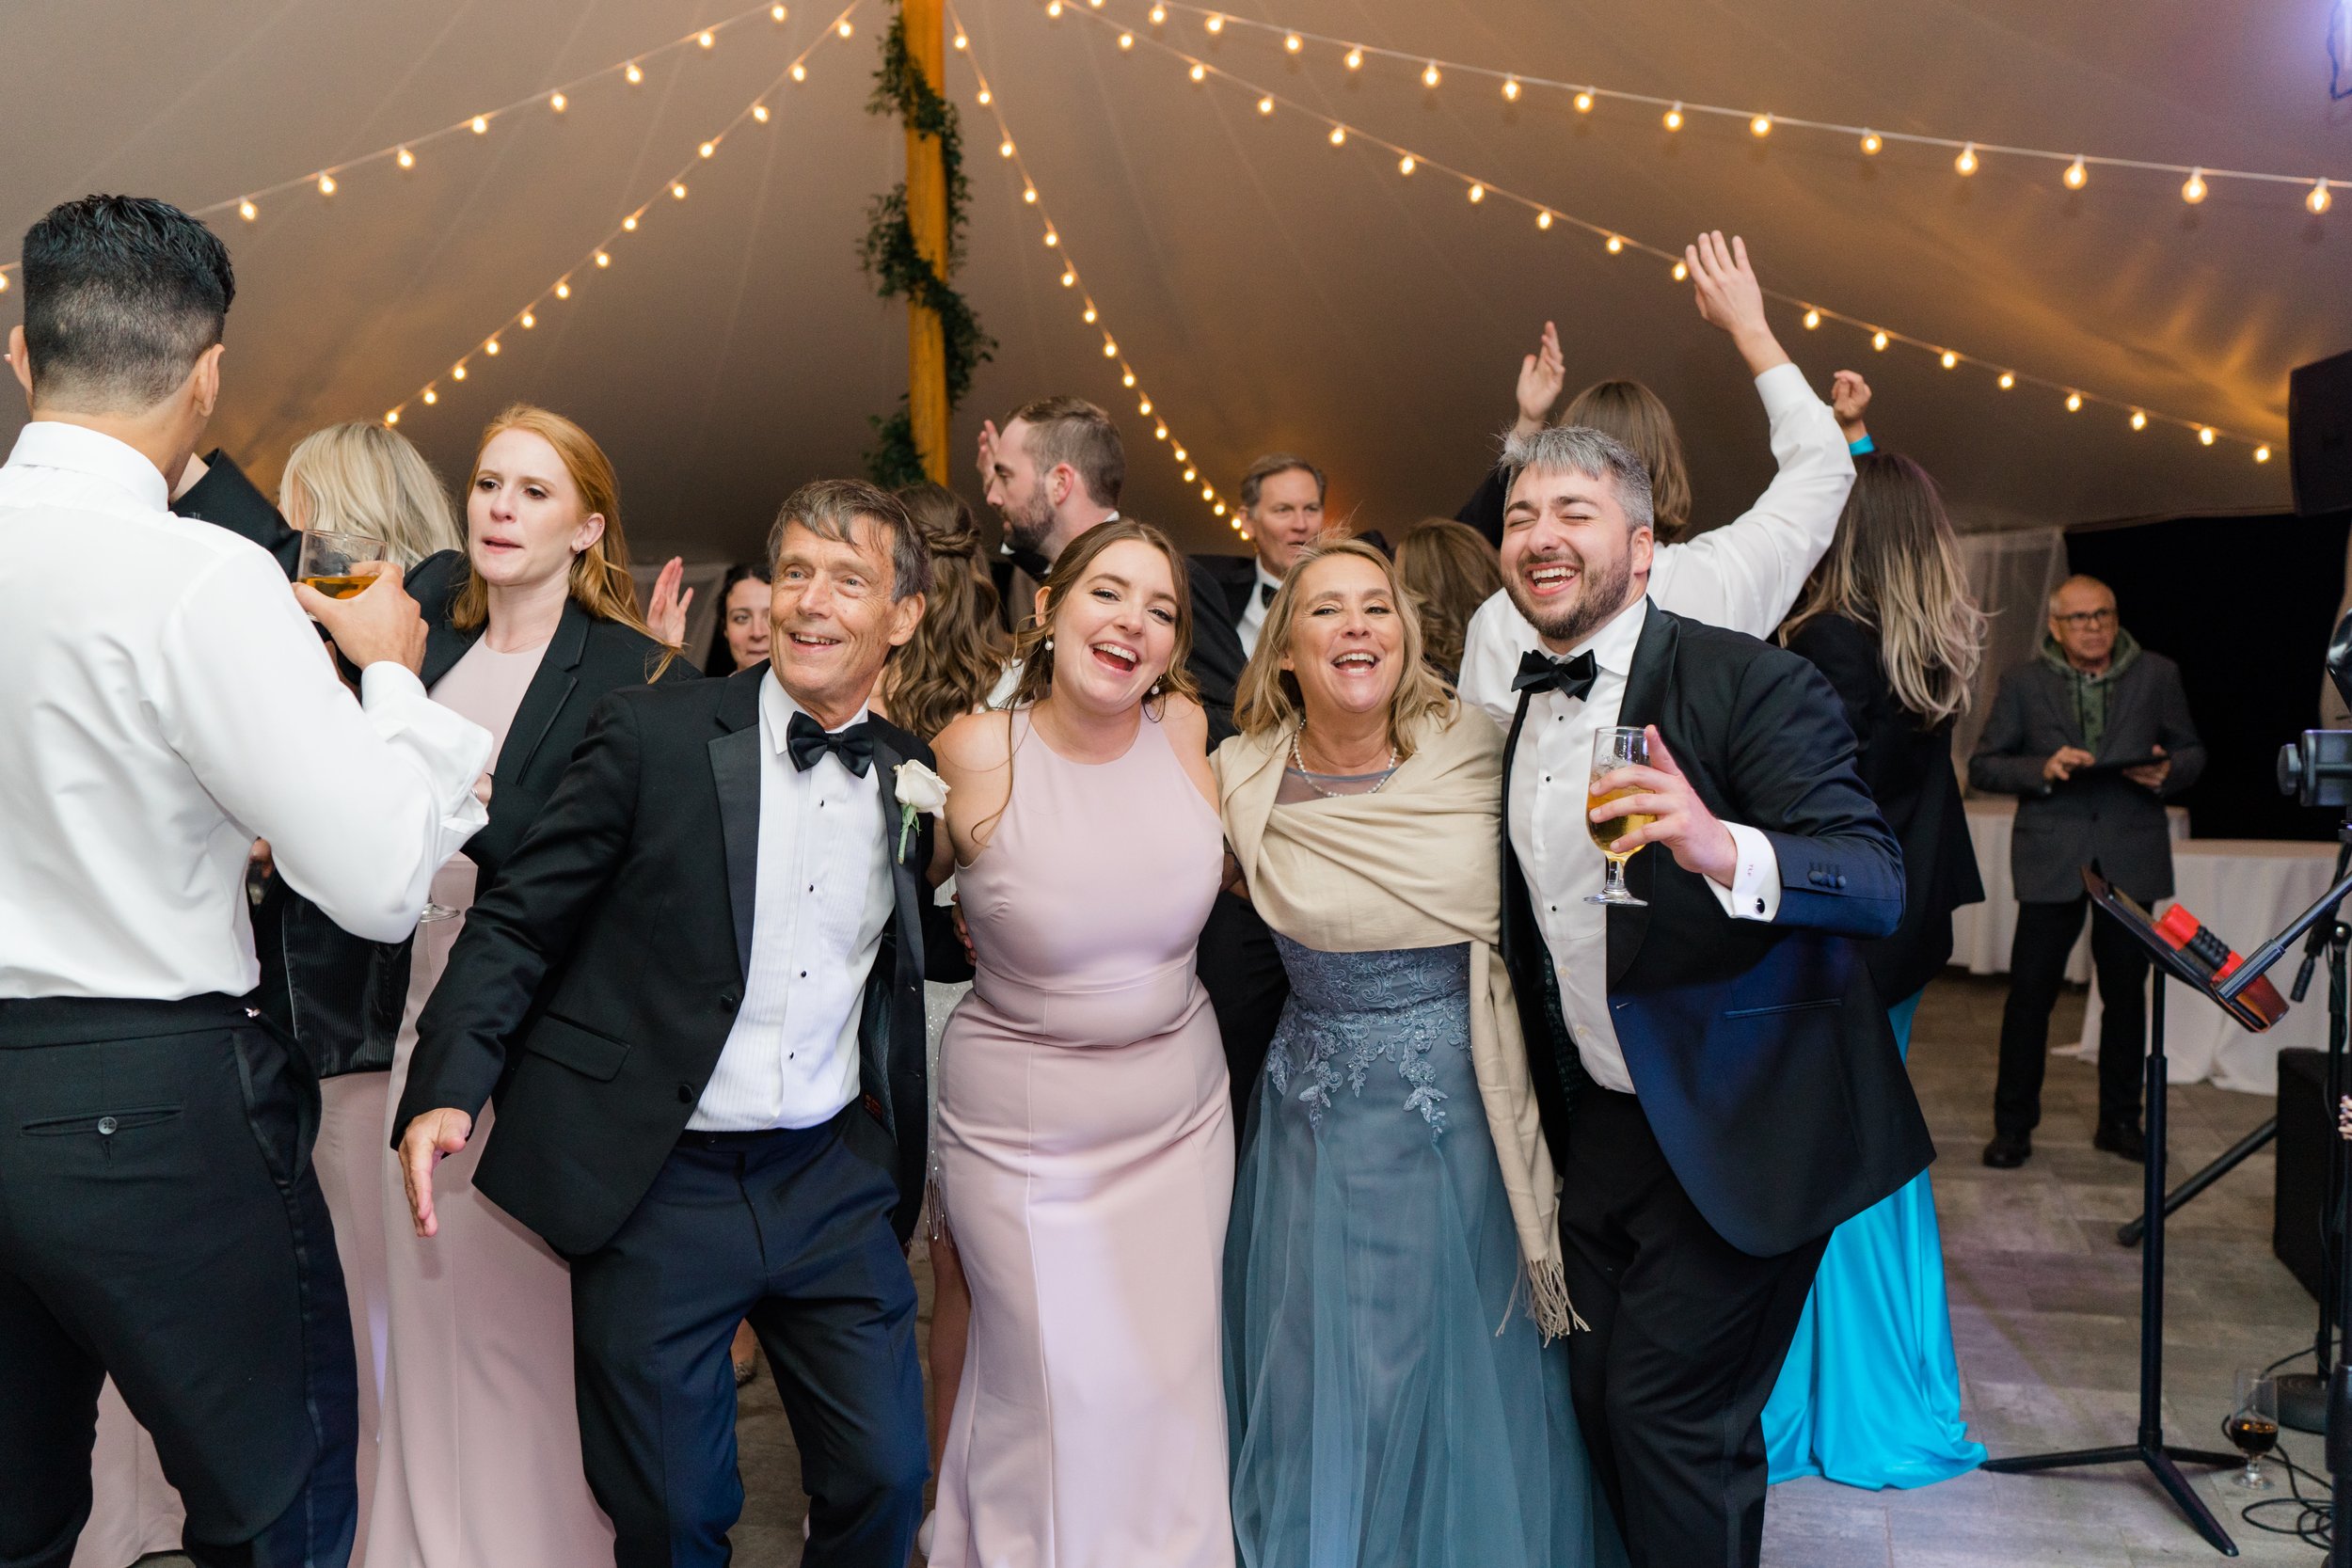 candid group photo on the dance floor during summer wedding.